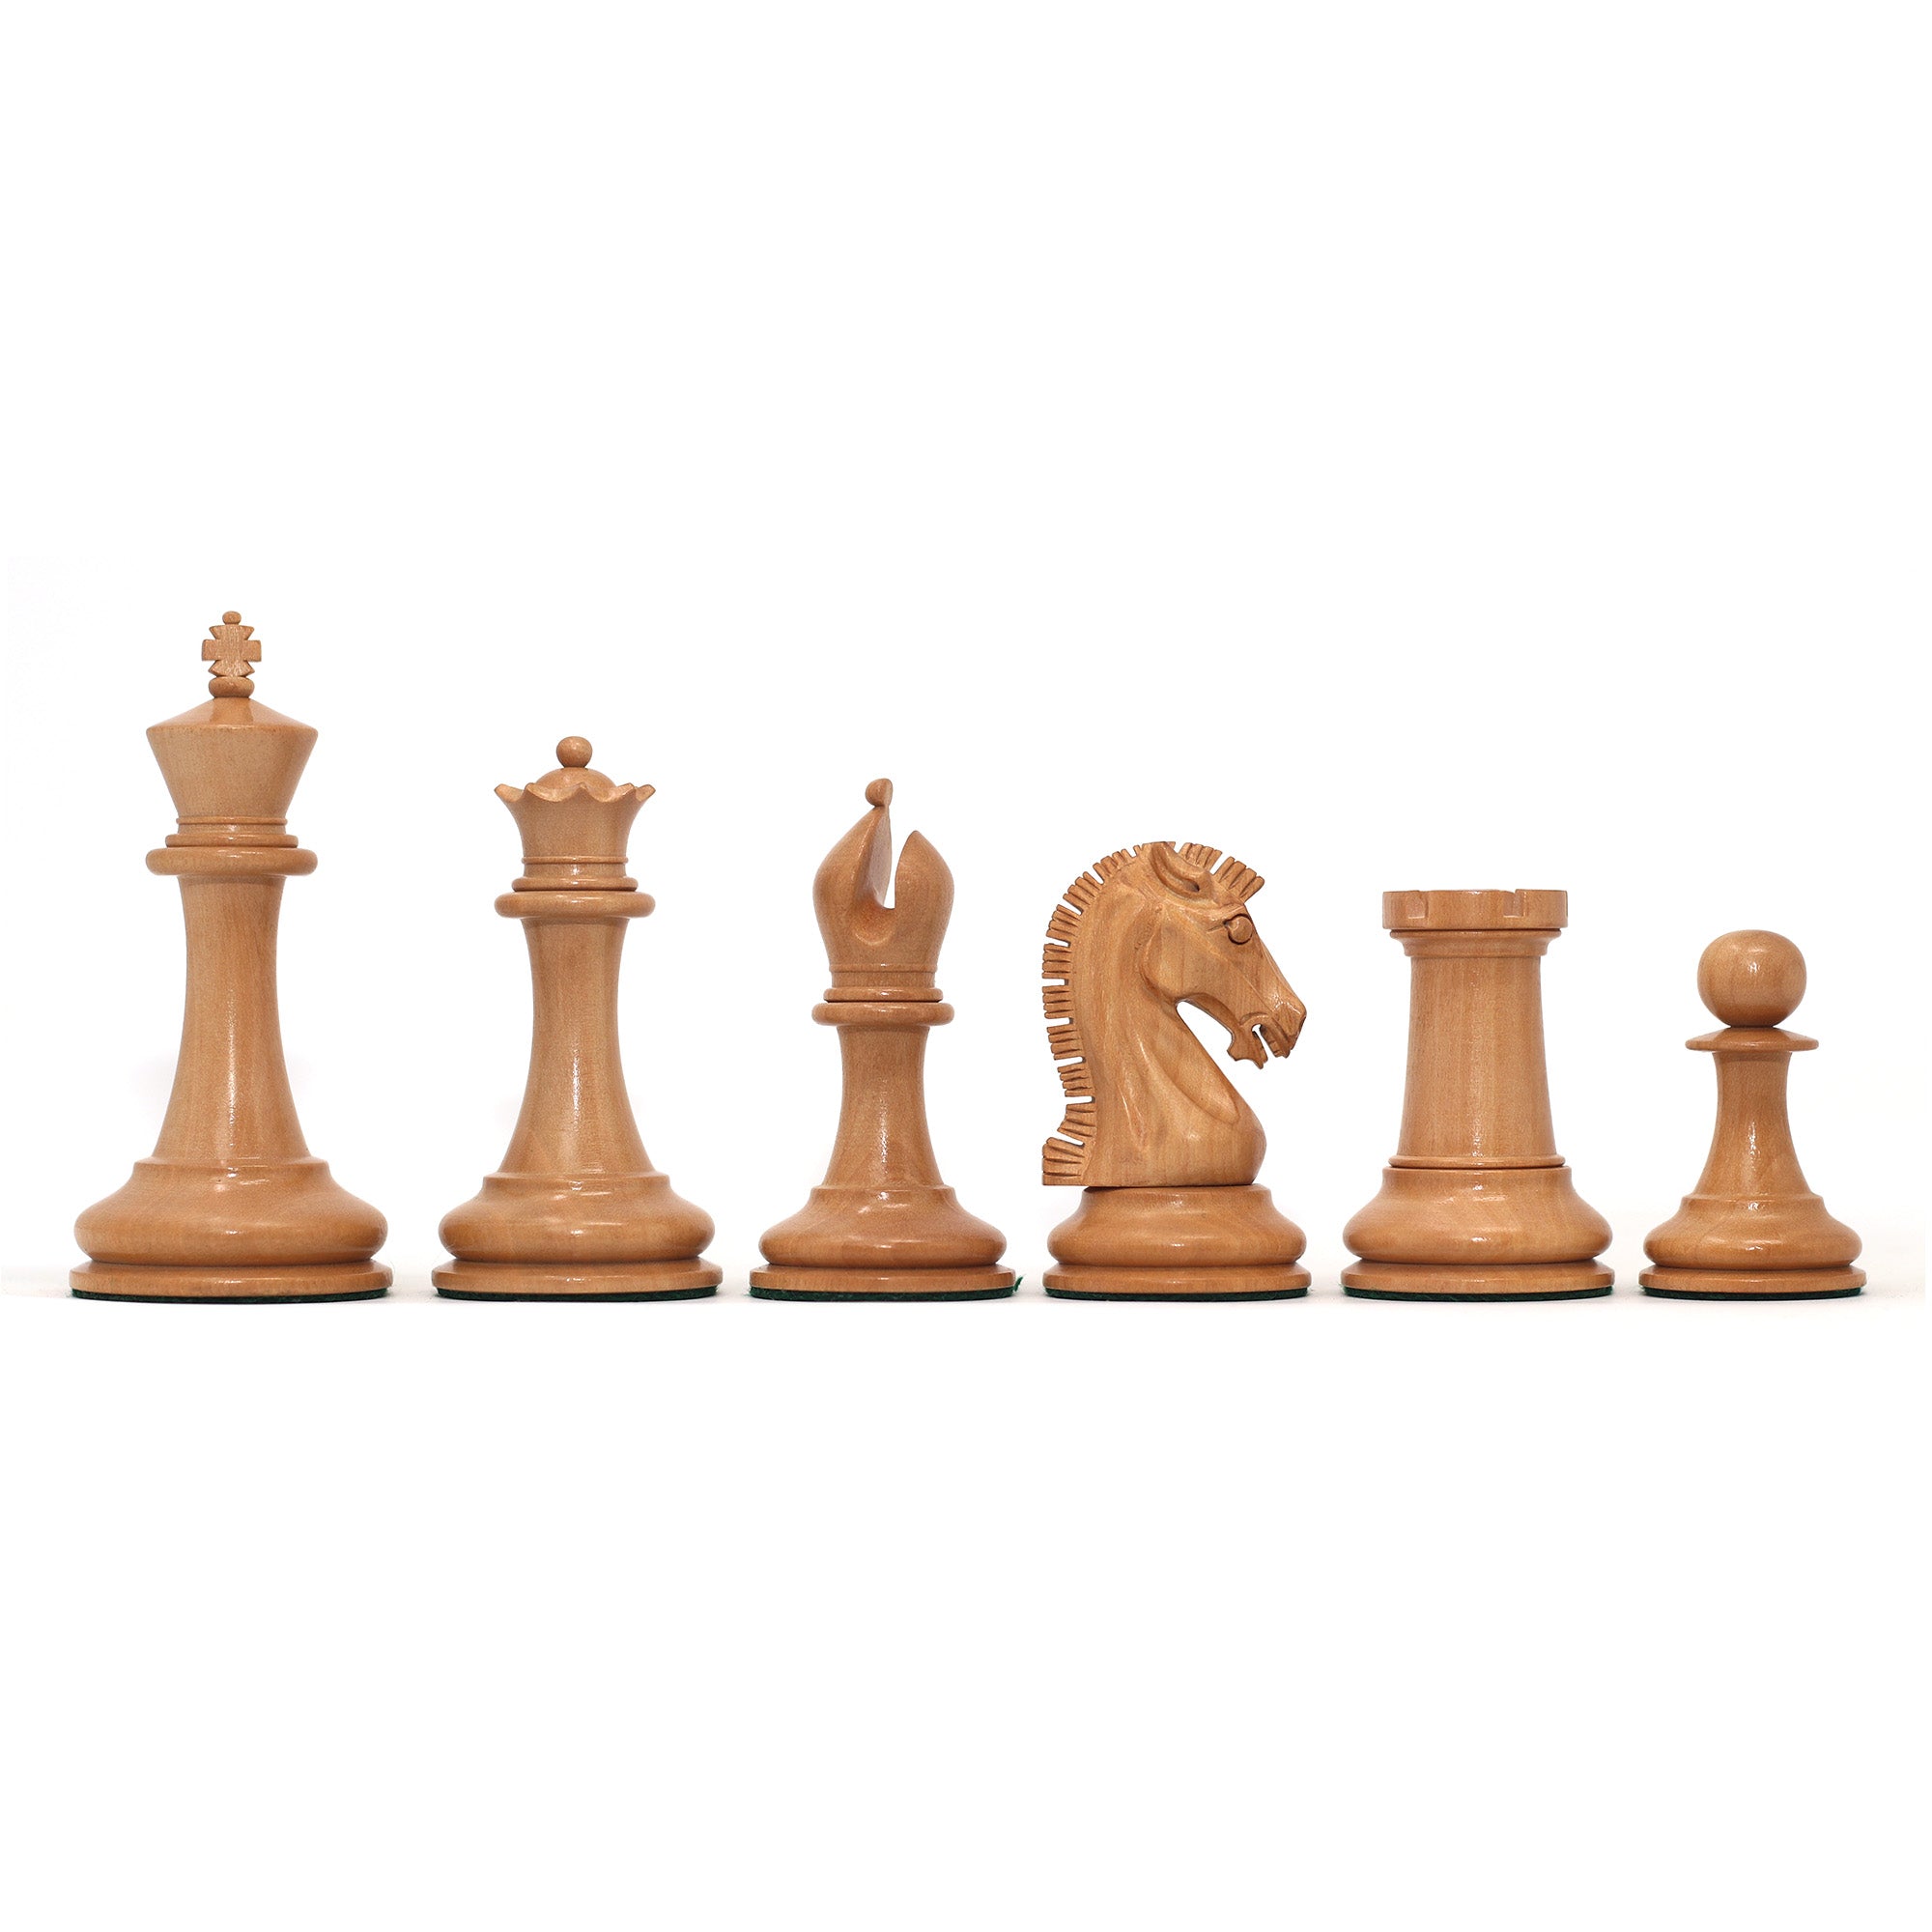 Commemorative Signature Series 3.625" Staunton Chessmen by MANDEEP SAGGU in Non-Antiqued/ Mahogany Stained Boxwood